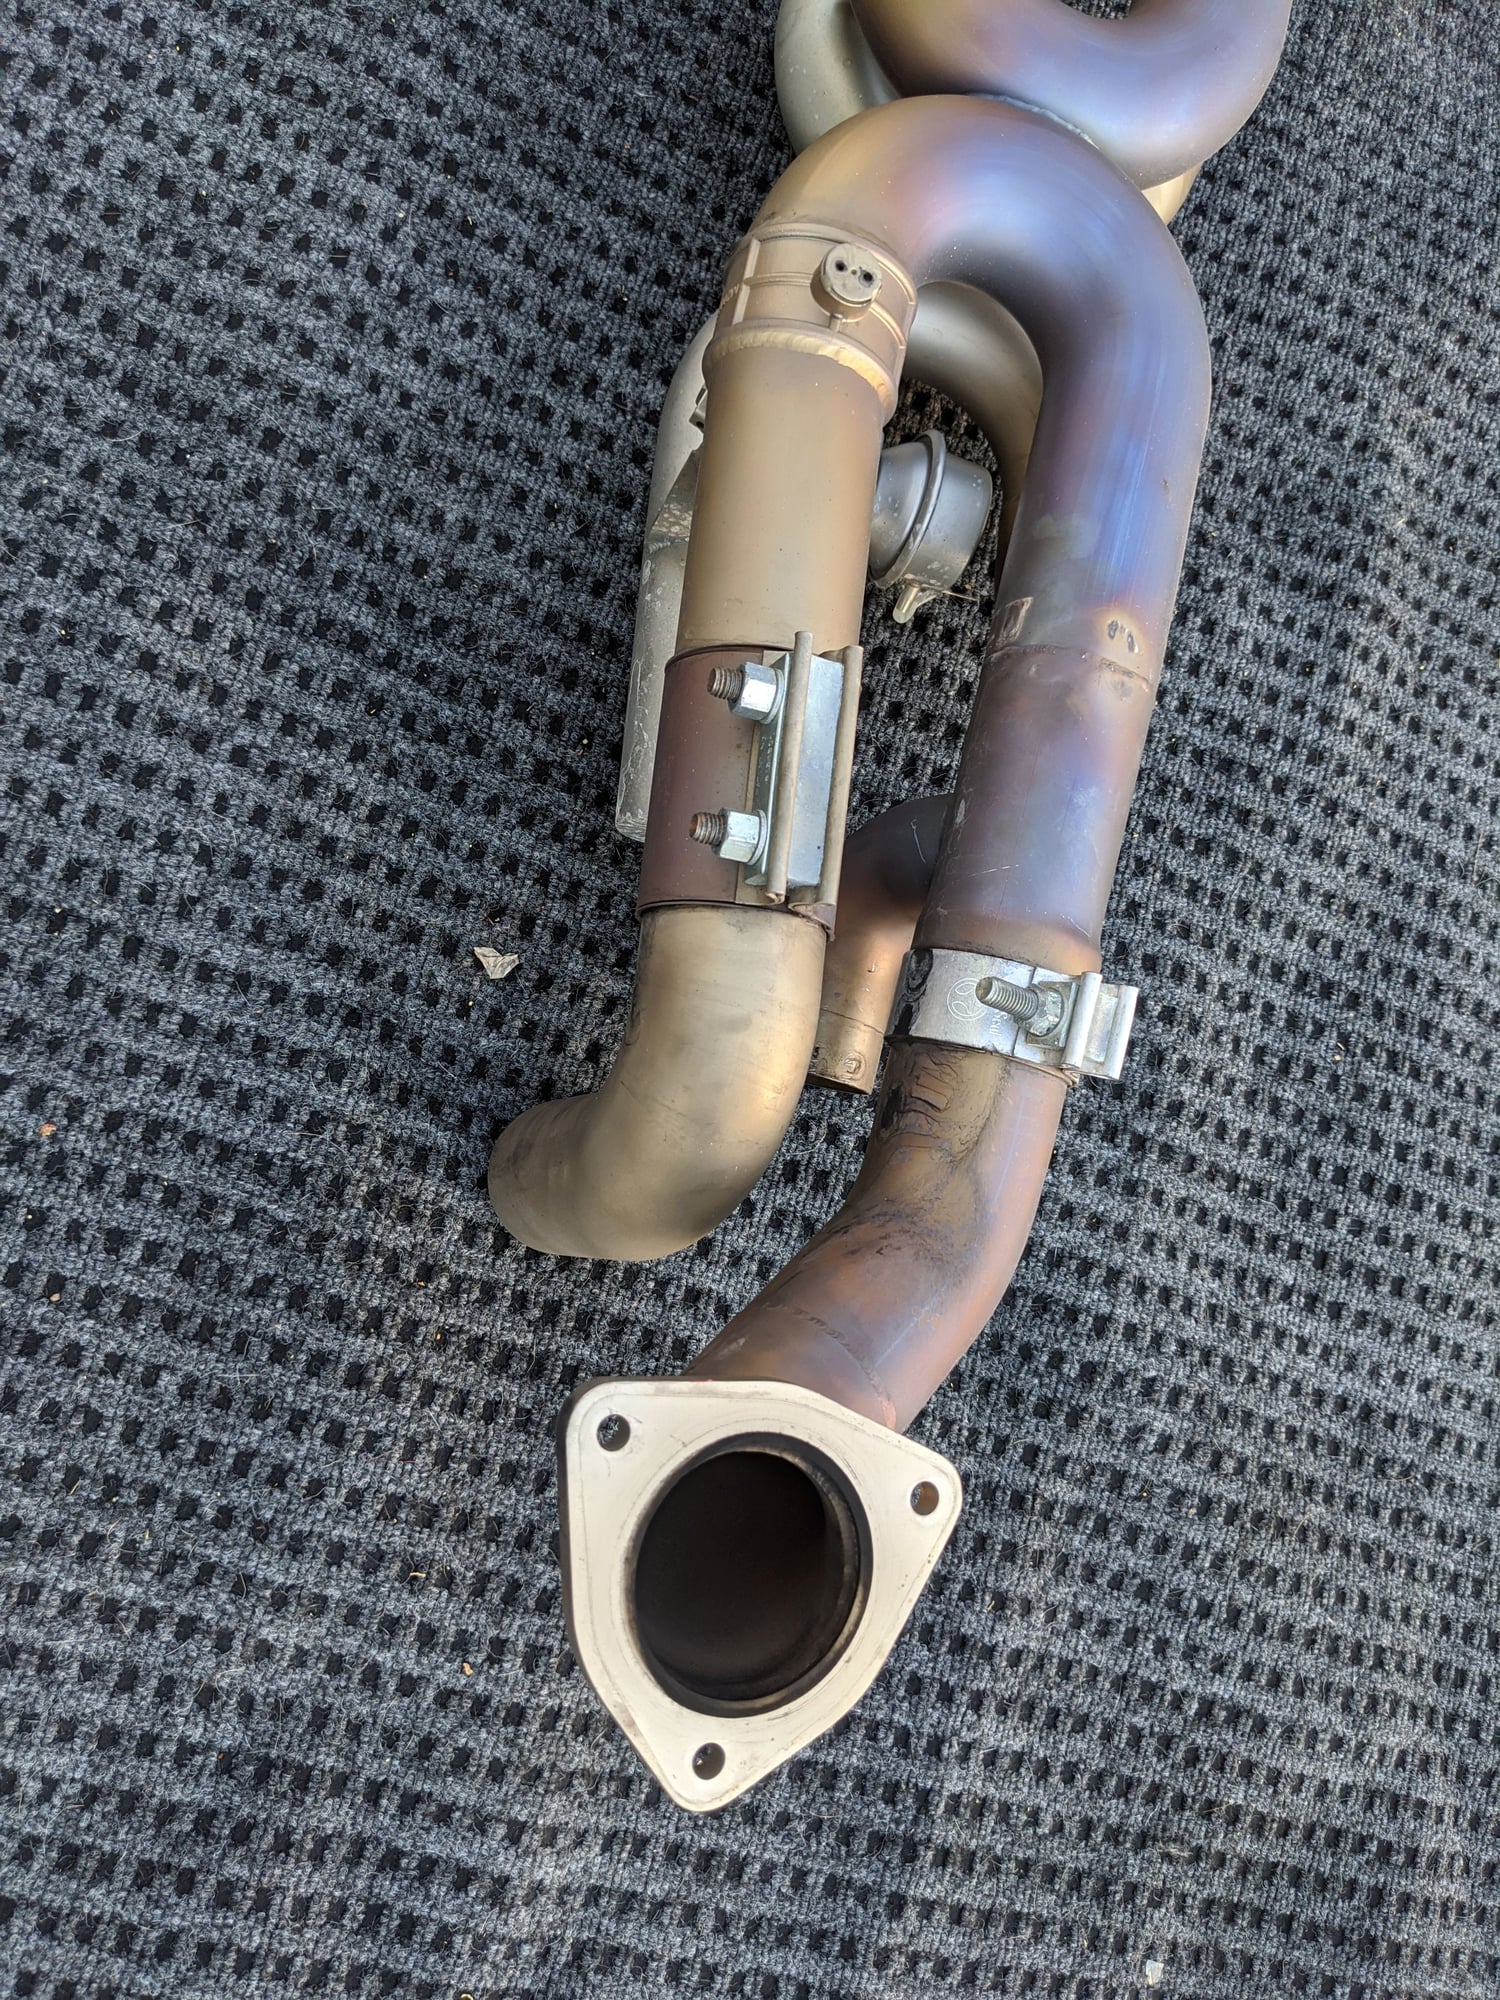 Engine - Exhaust - 991.1 Soul Exhaust w/Valves - Used - 2012 to 2016 Porsche 911 - Sunnyvale, CA 94086, United States